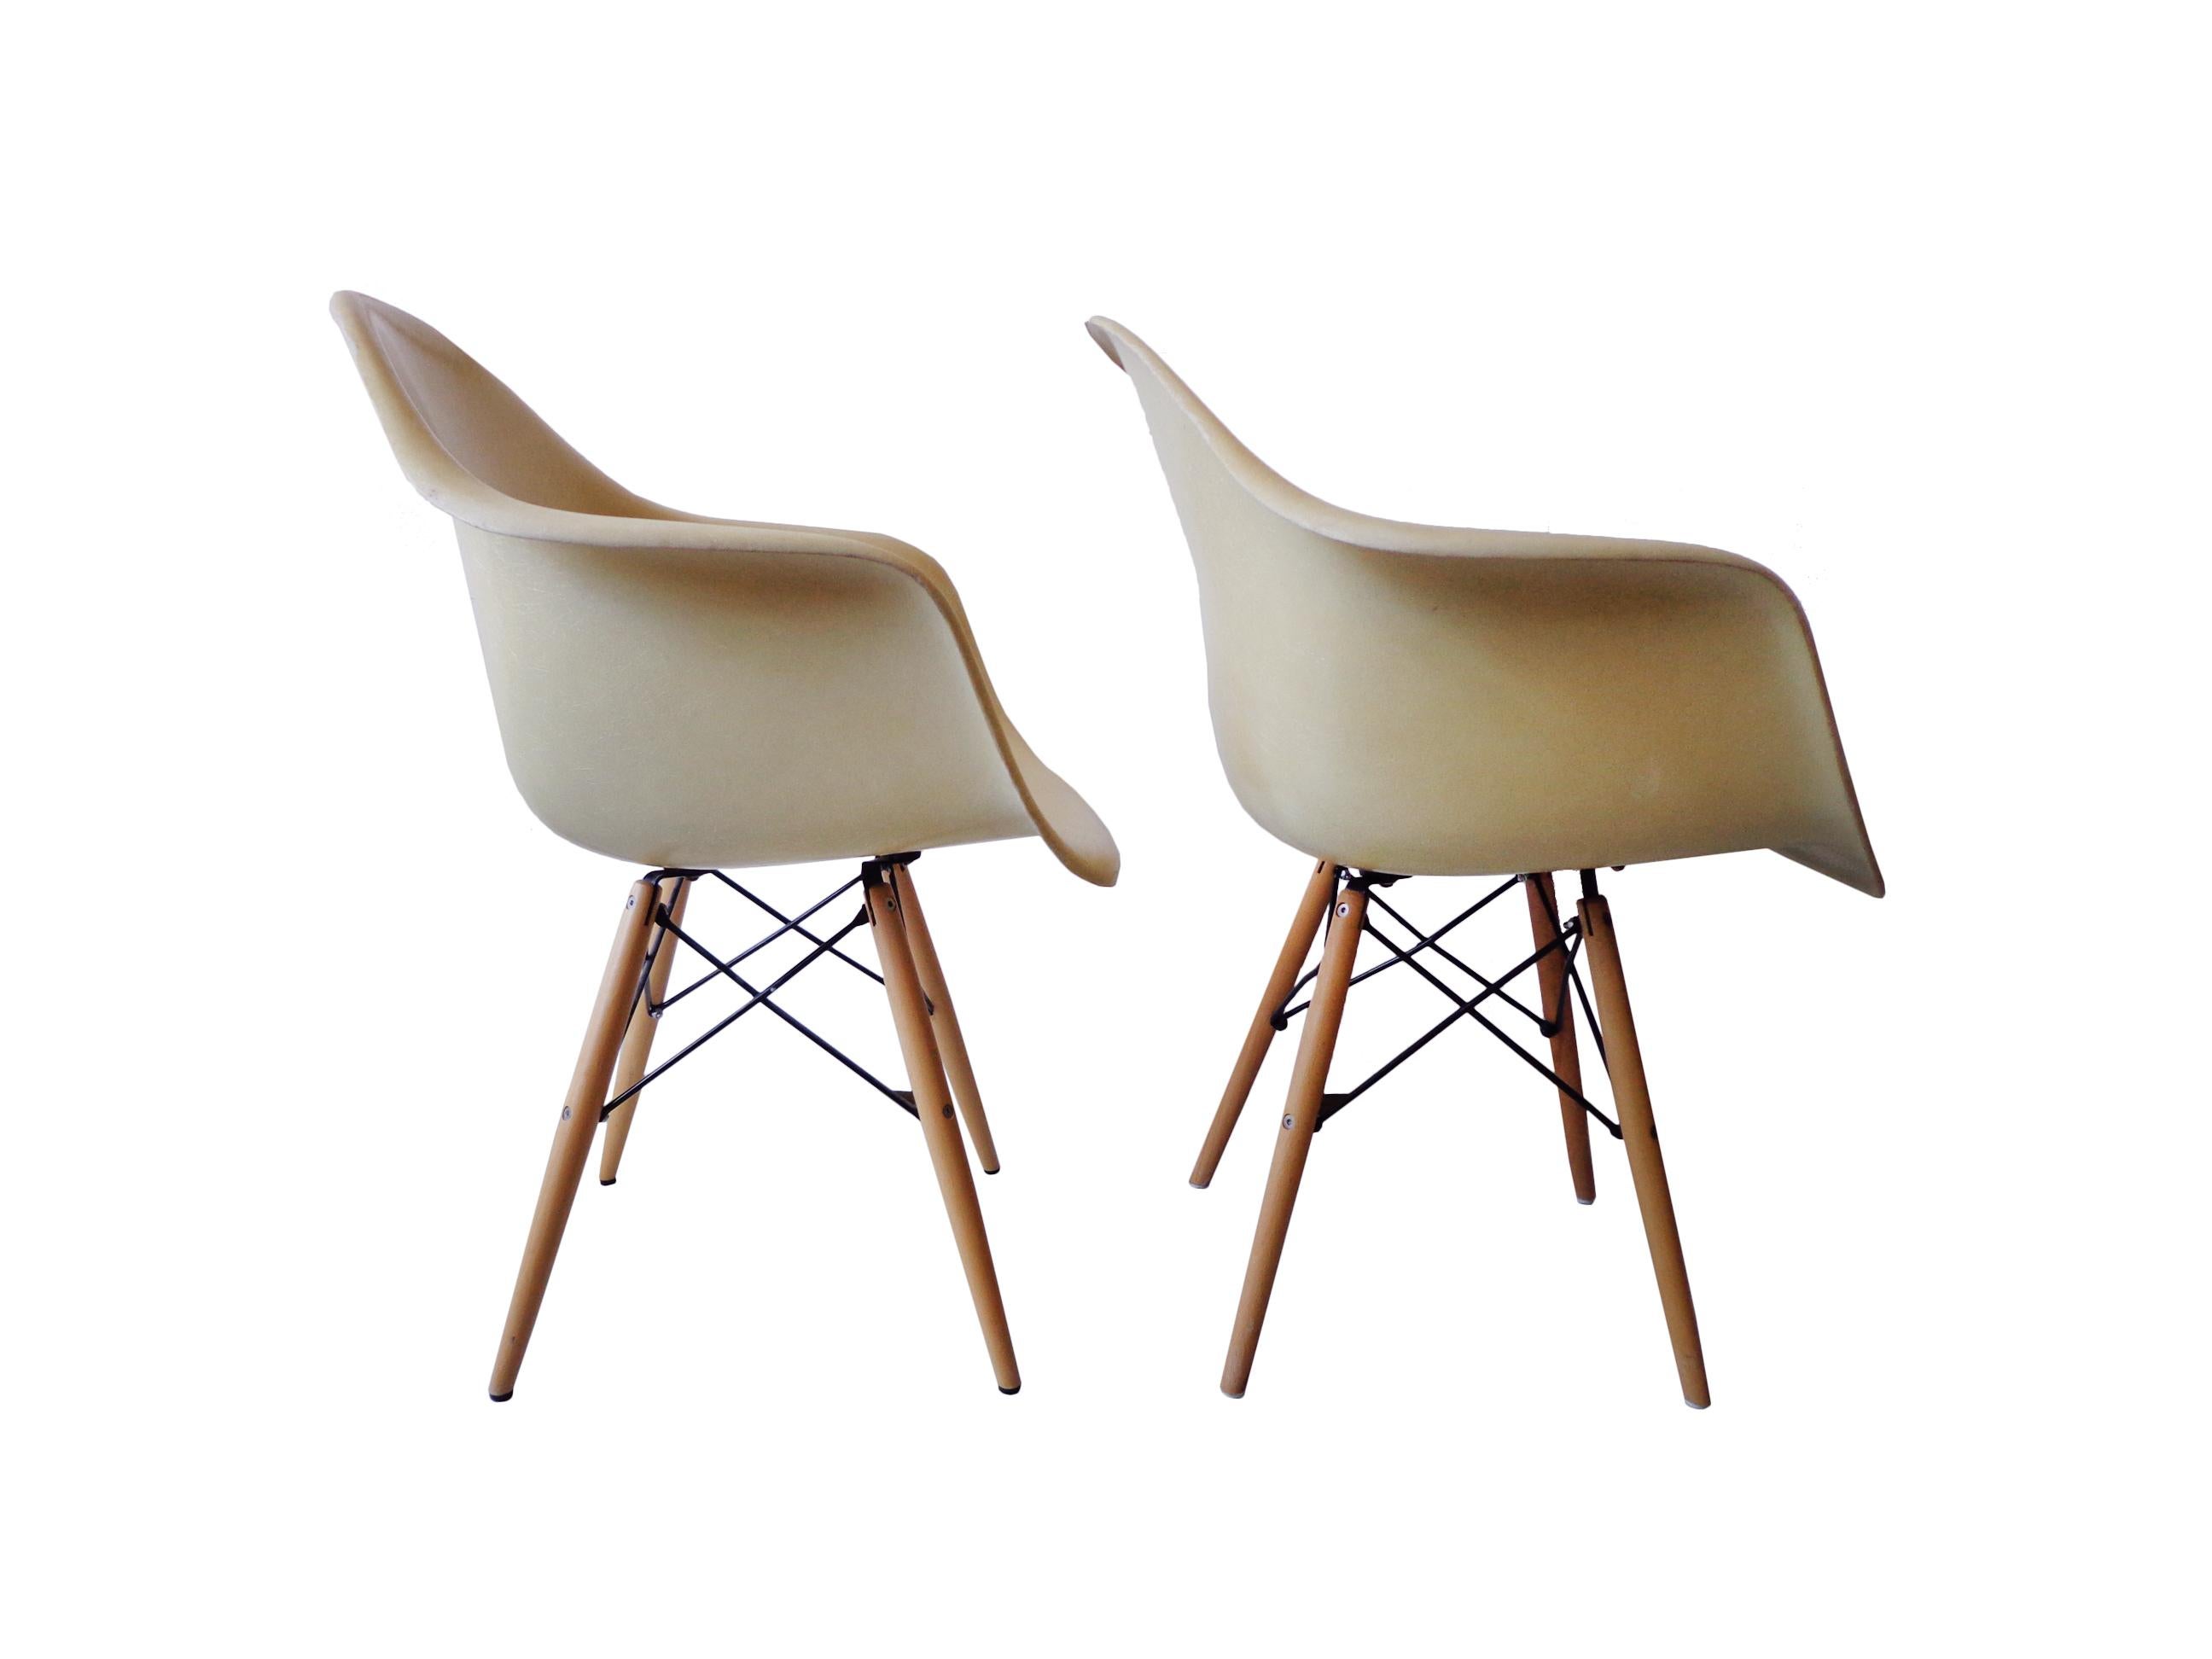 American Mid-Century Modern Charles Eames Herman Miller Fiberglass Dining Chairs, 1960s For Sale